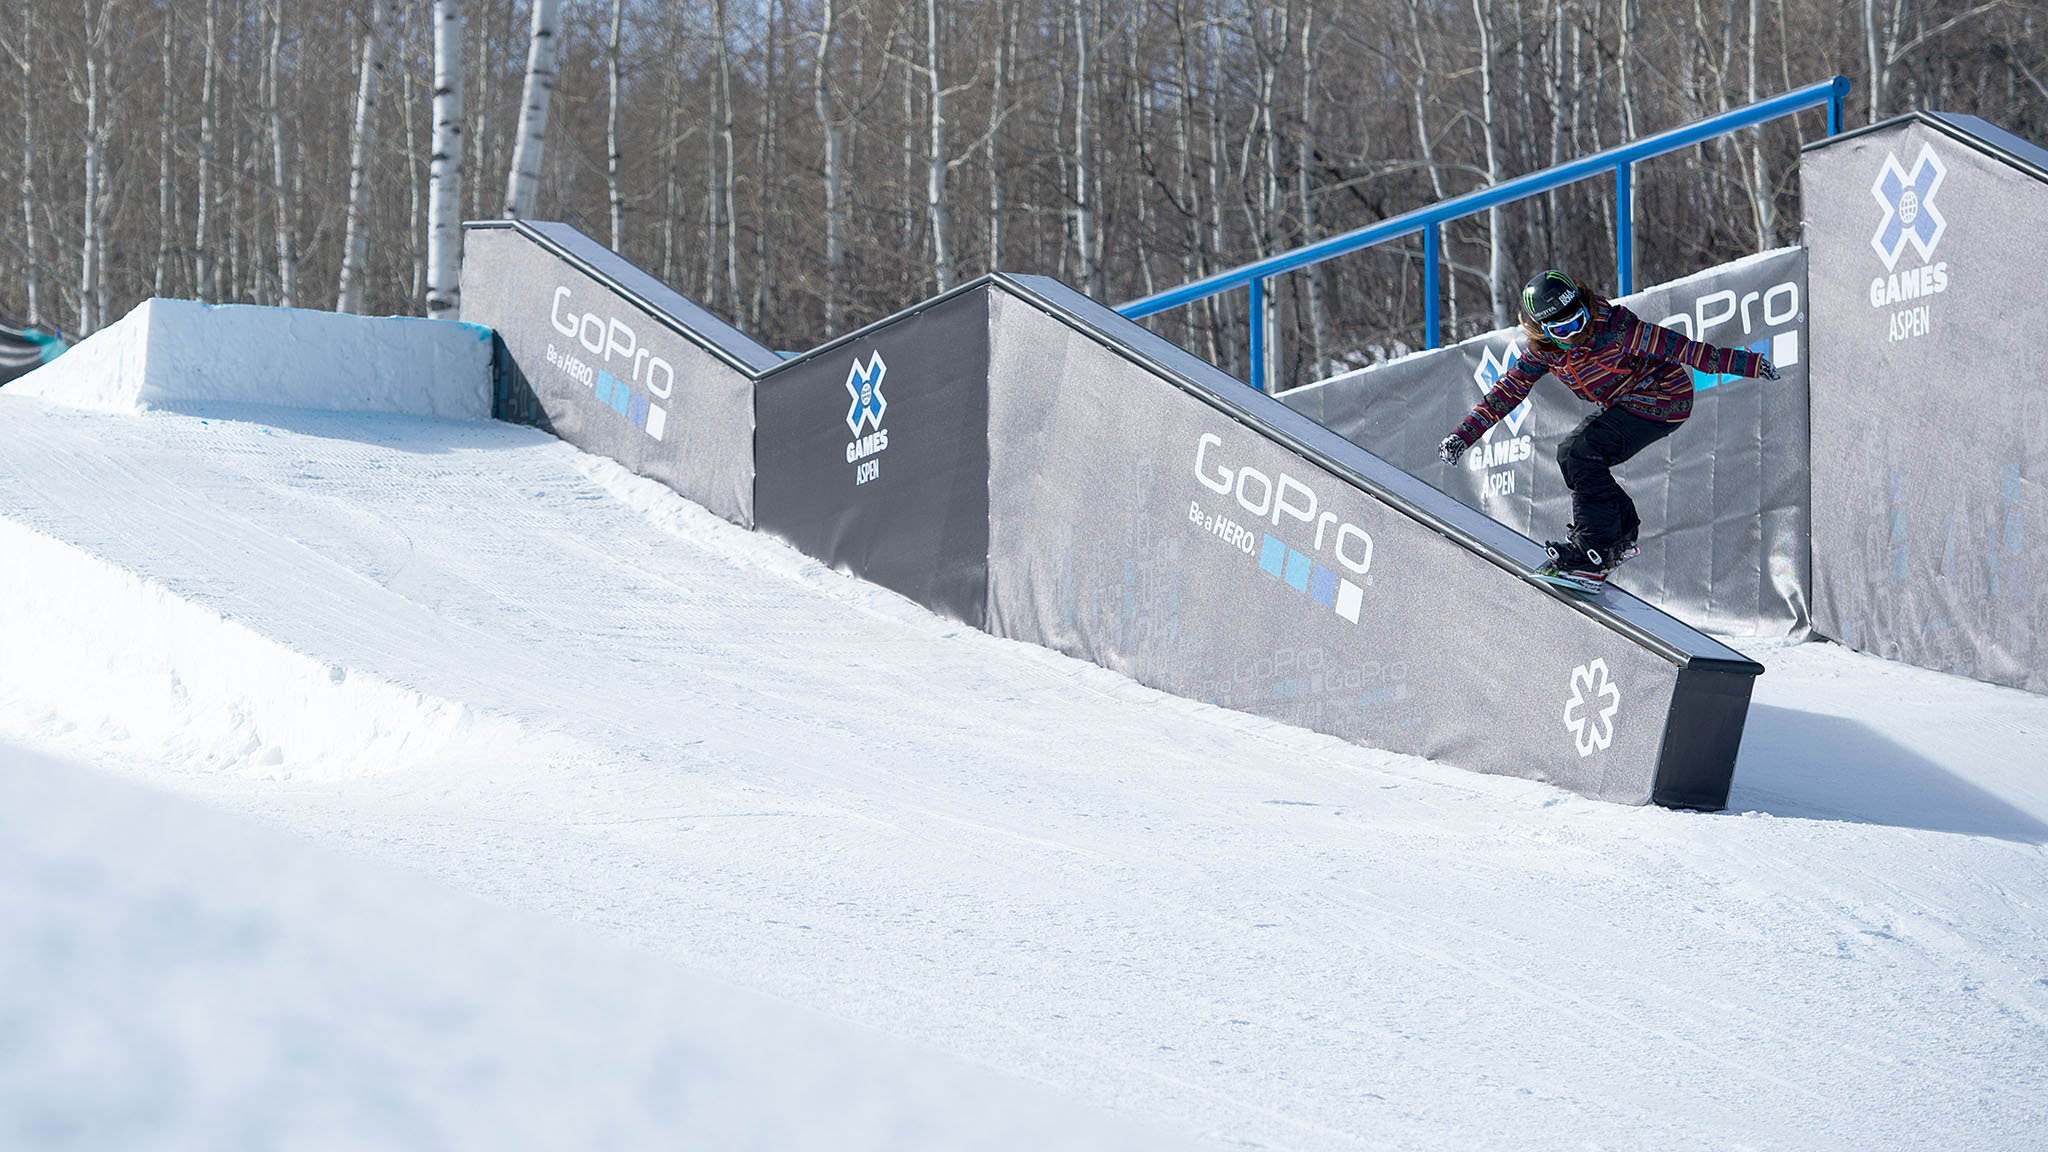 The hard-to-impress Norwegians agree: Anderson has the best rail style in the women's field.